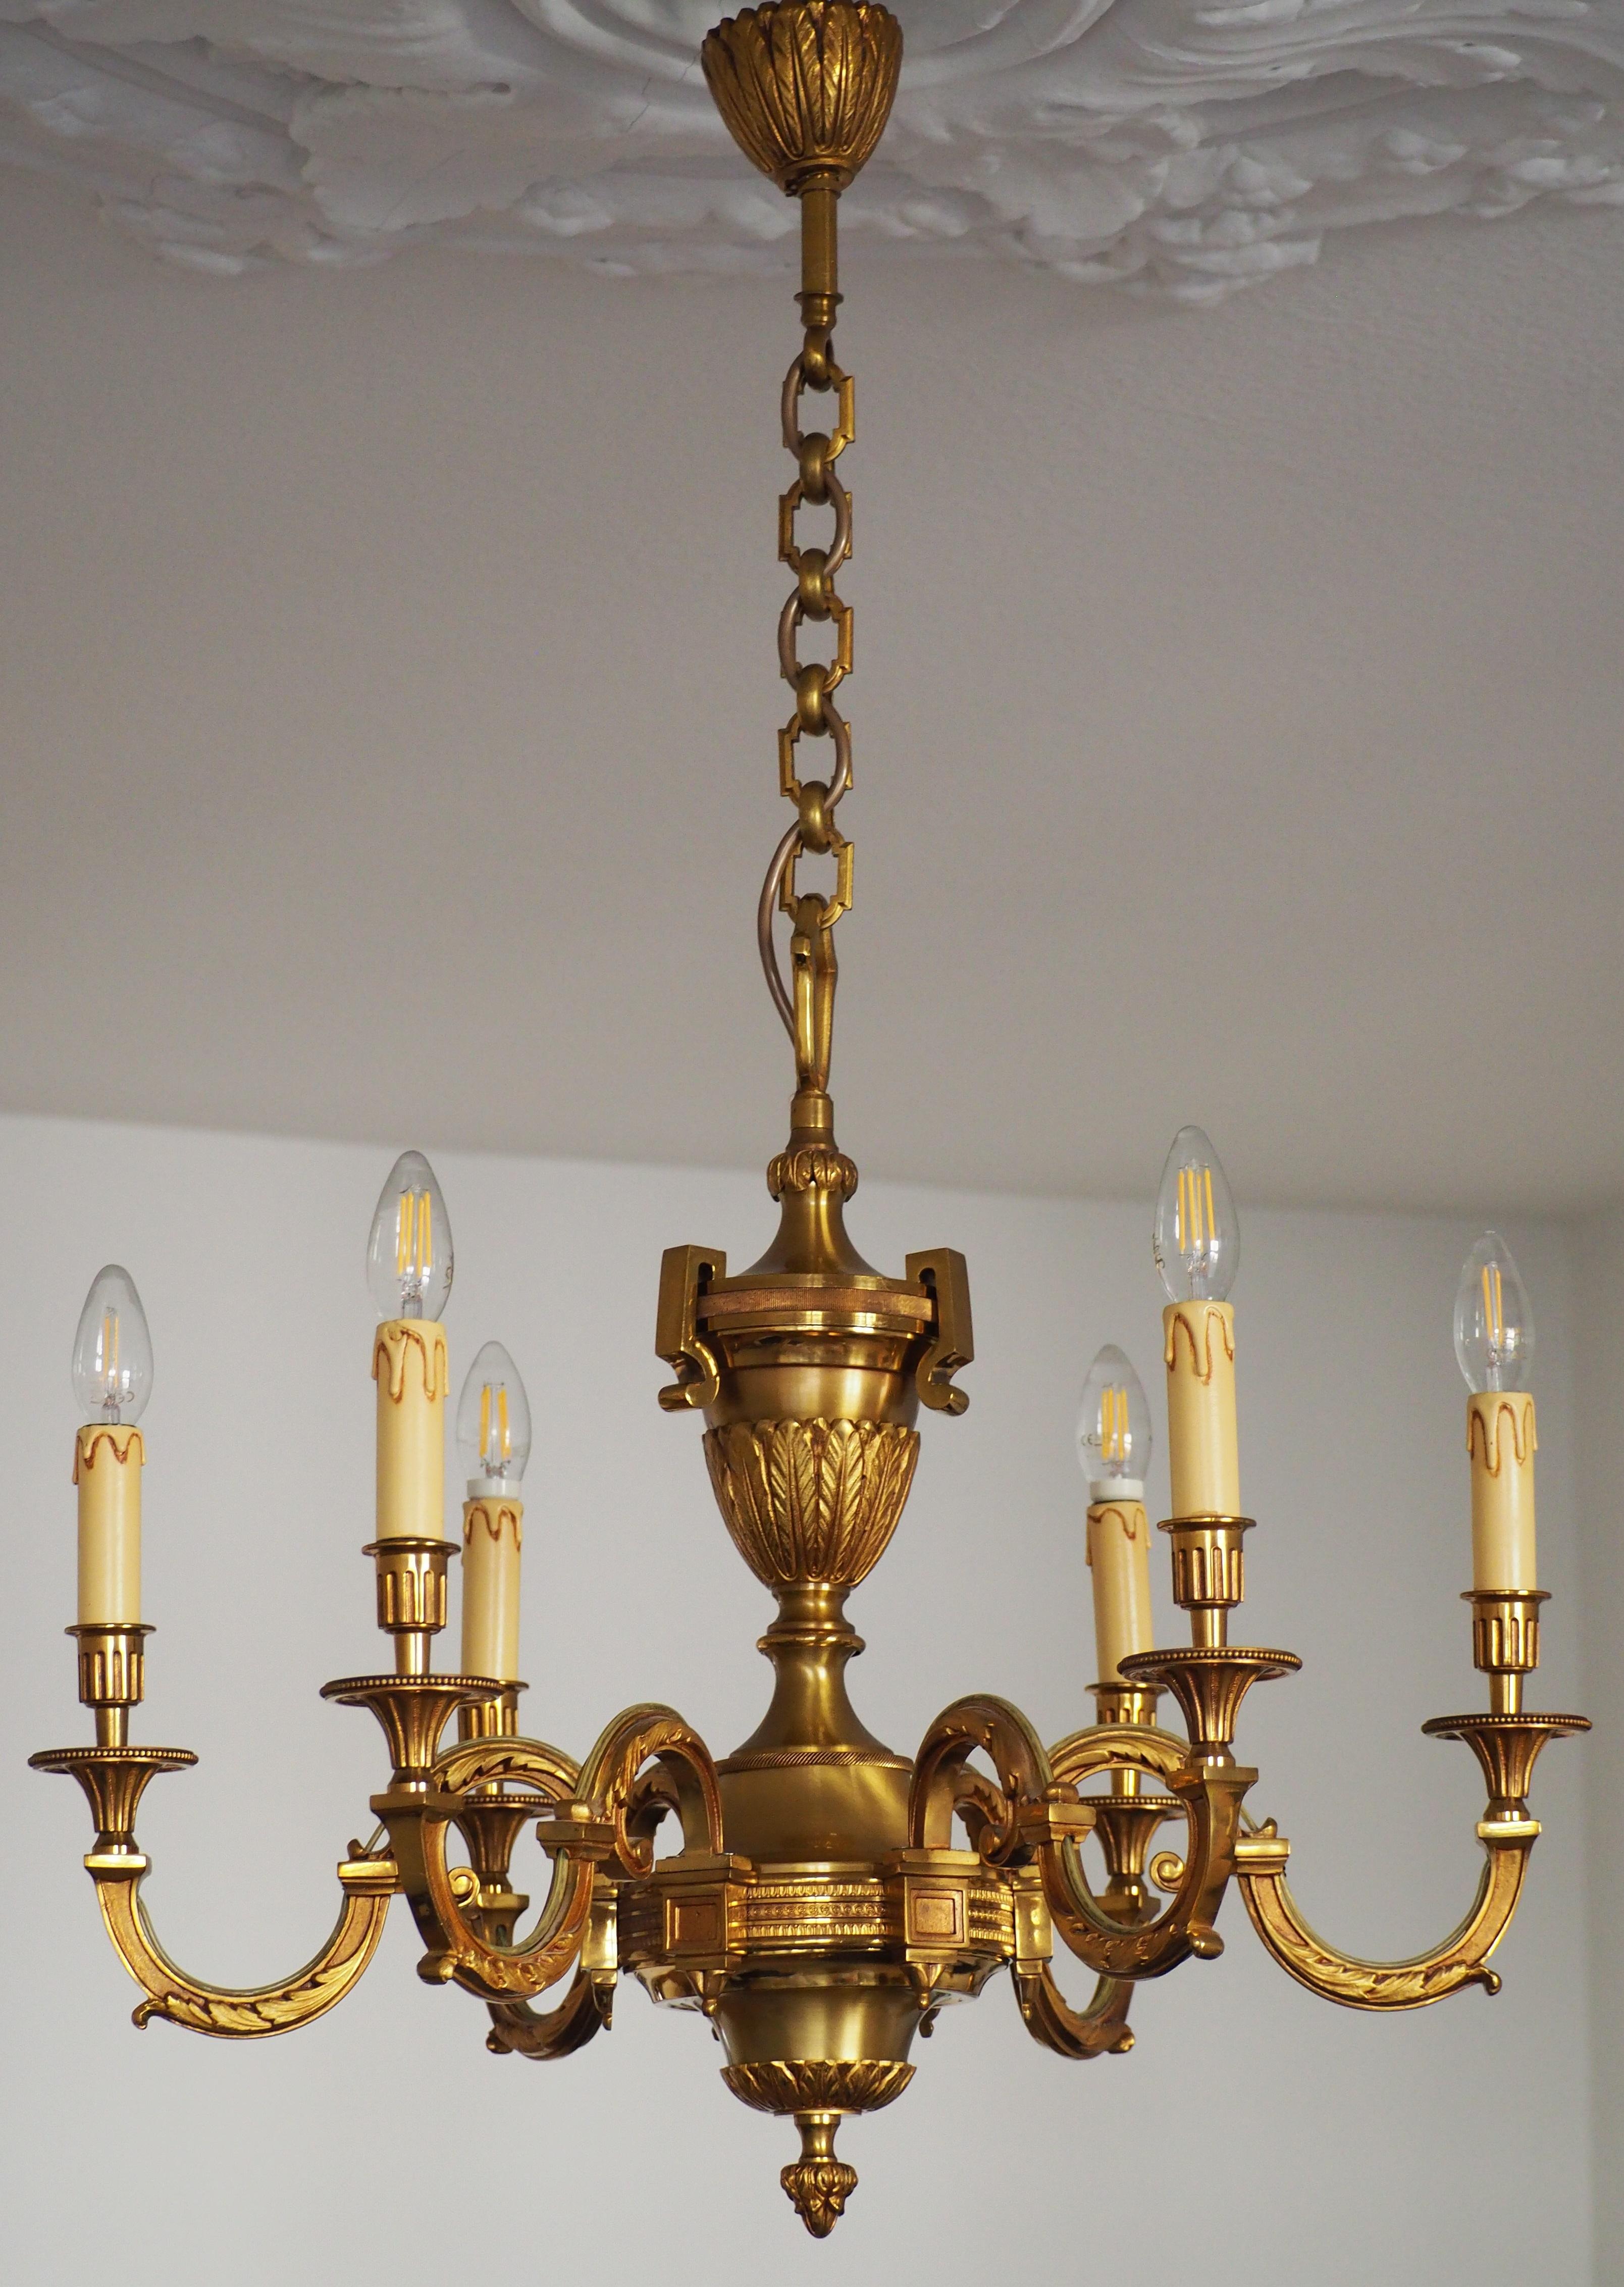 A beautiful pair of solid bronze chandeliers made by LG Paris (Maison Lucien Gau), Paris, France.
Both chandeliers have six scroll arms and displays great elegance, thanks to a platinum coating old gold. This chandeliers are inspired by the